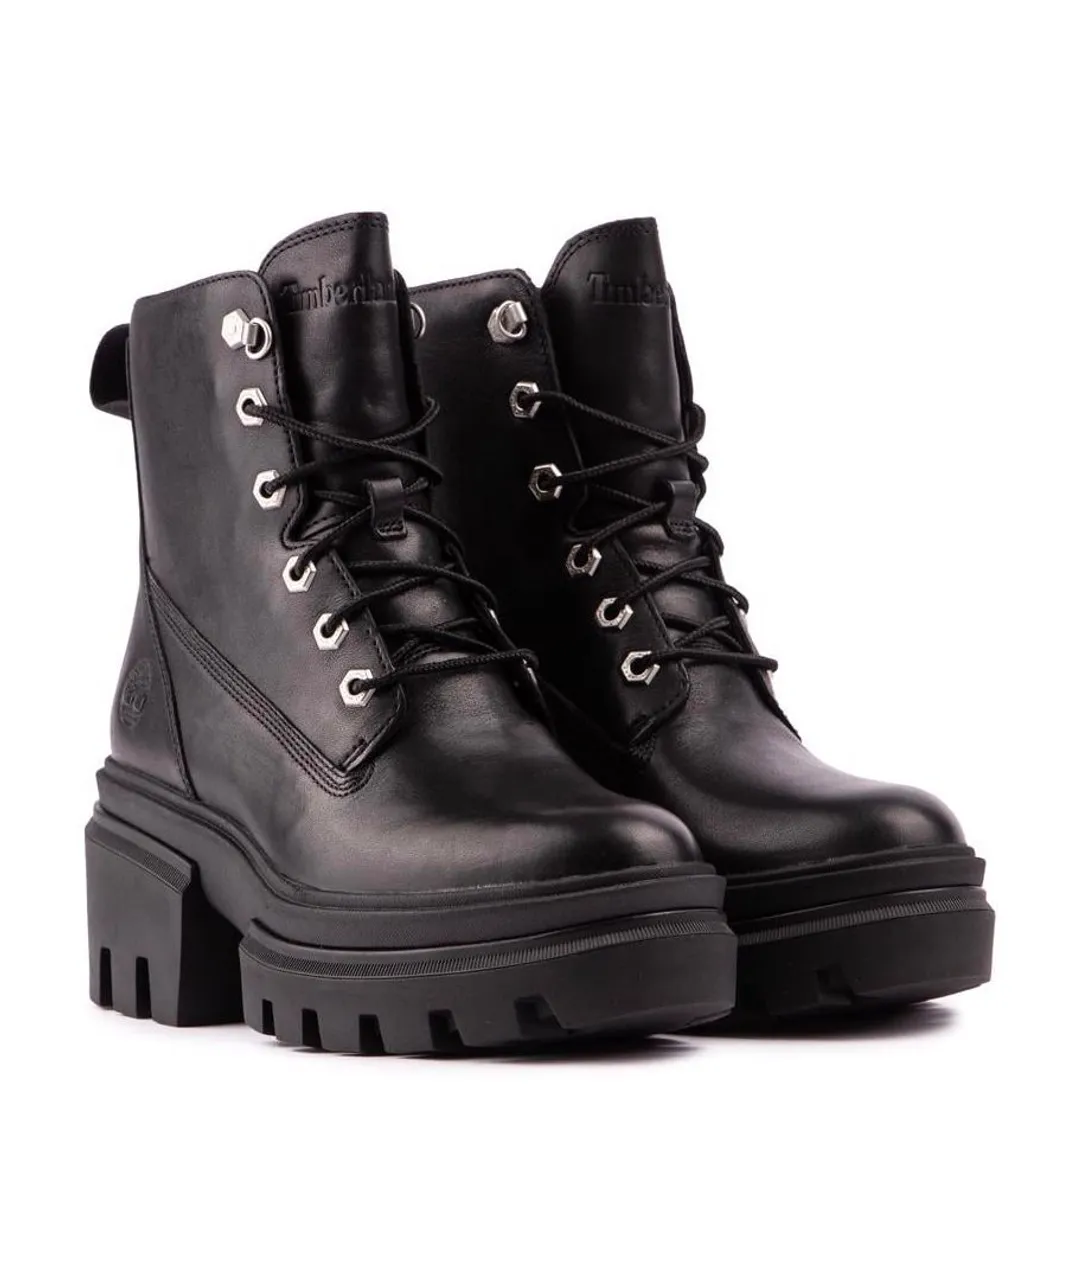 Timberland Womens Everleigh Lace Up Boots - Black